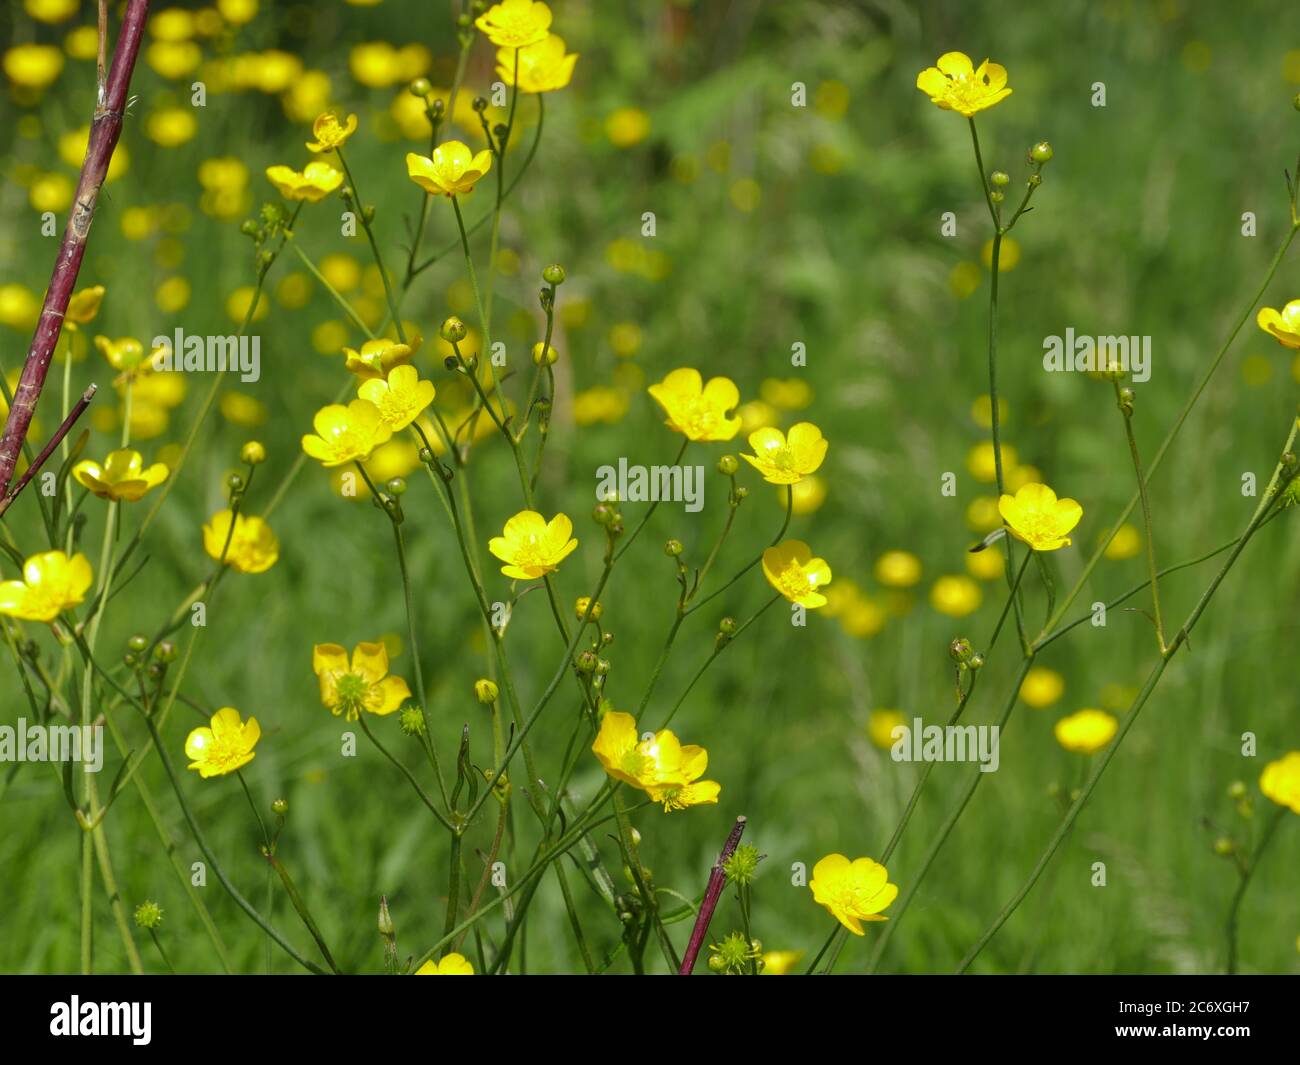 yellow flowers burning buttercup, poisonous and herbal medicative plant Stock Photo